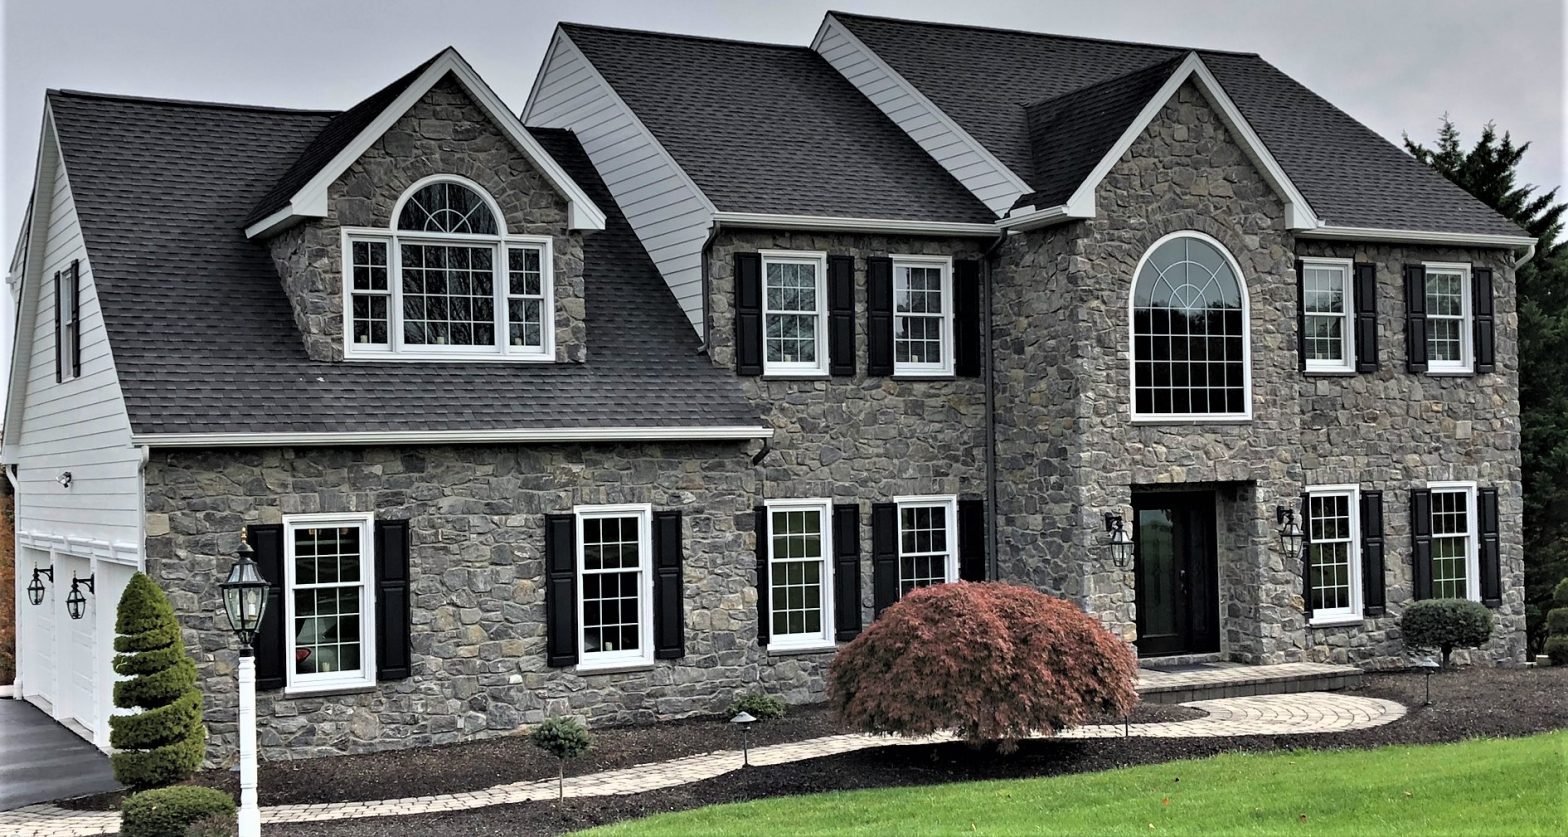 How to Weigh the Pros and Cons of Veneer vs. Natural Stone Exteriors